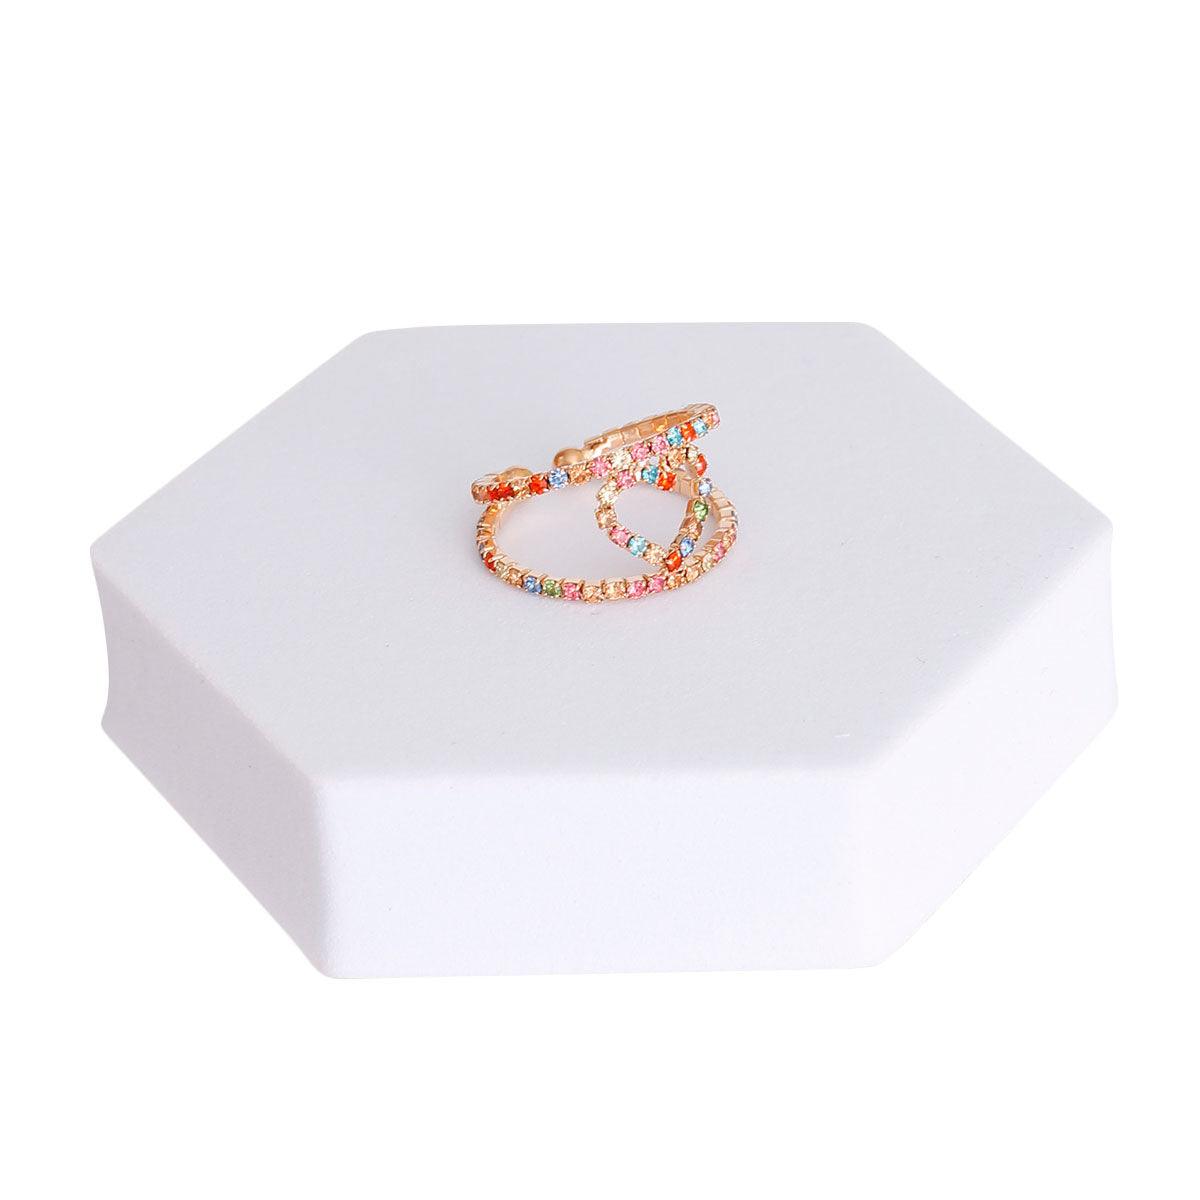 Multicolor Heart Ring: Add Some Fun to Your Accessories!